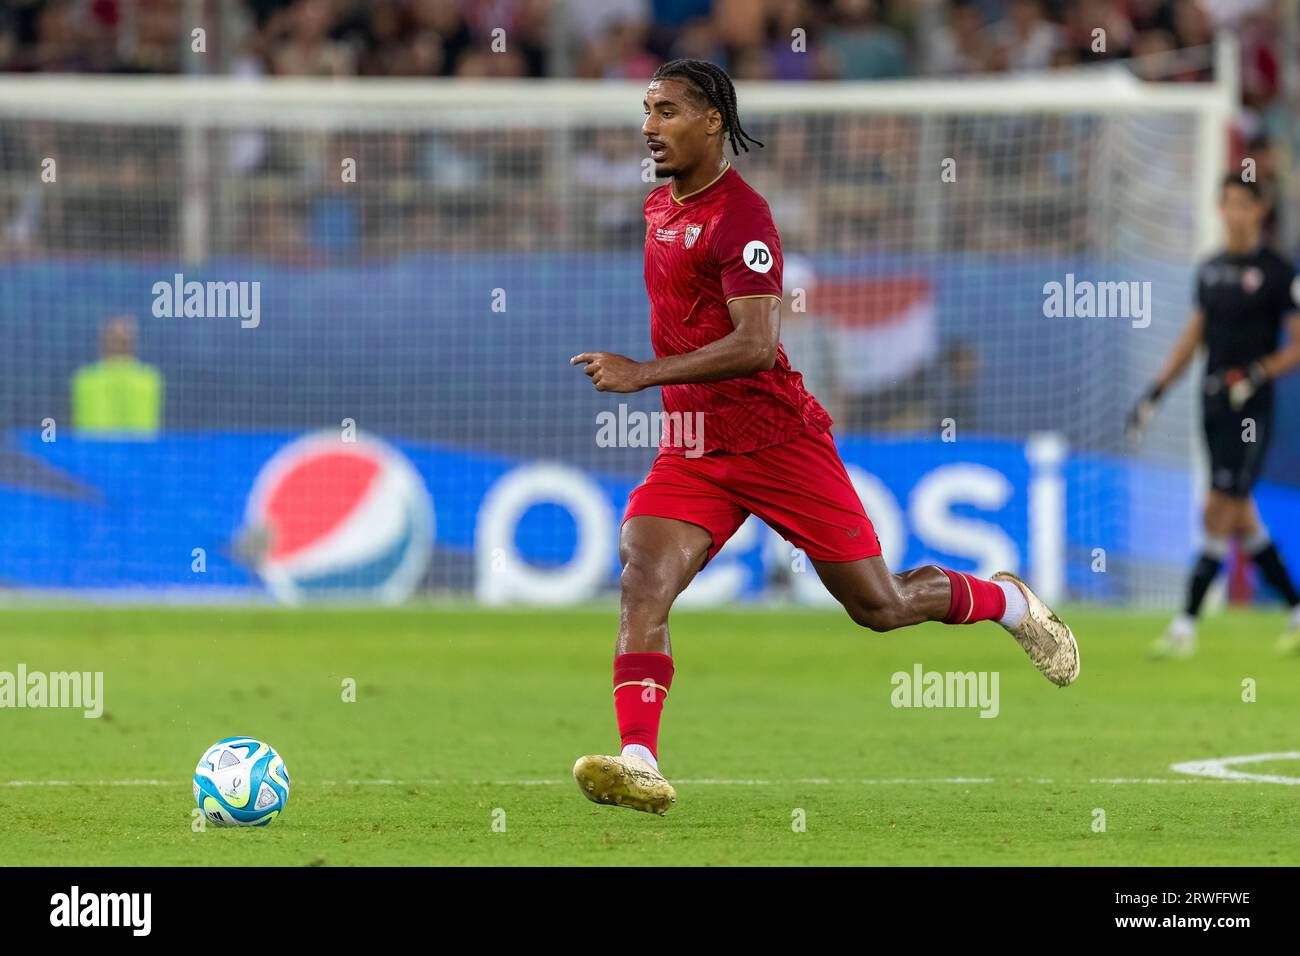 Athens, Greece - August 16,2023: Player of Loic Bade in action during the UEFA Super Cup Final match between Manchester City and Sevilla at Stadio Kar Stock Photo